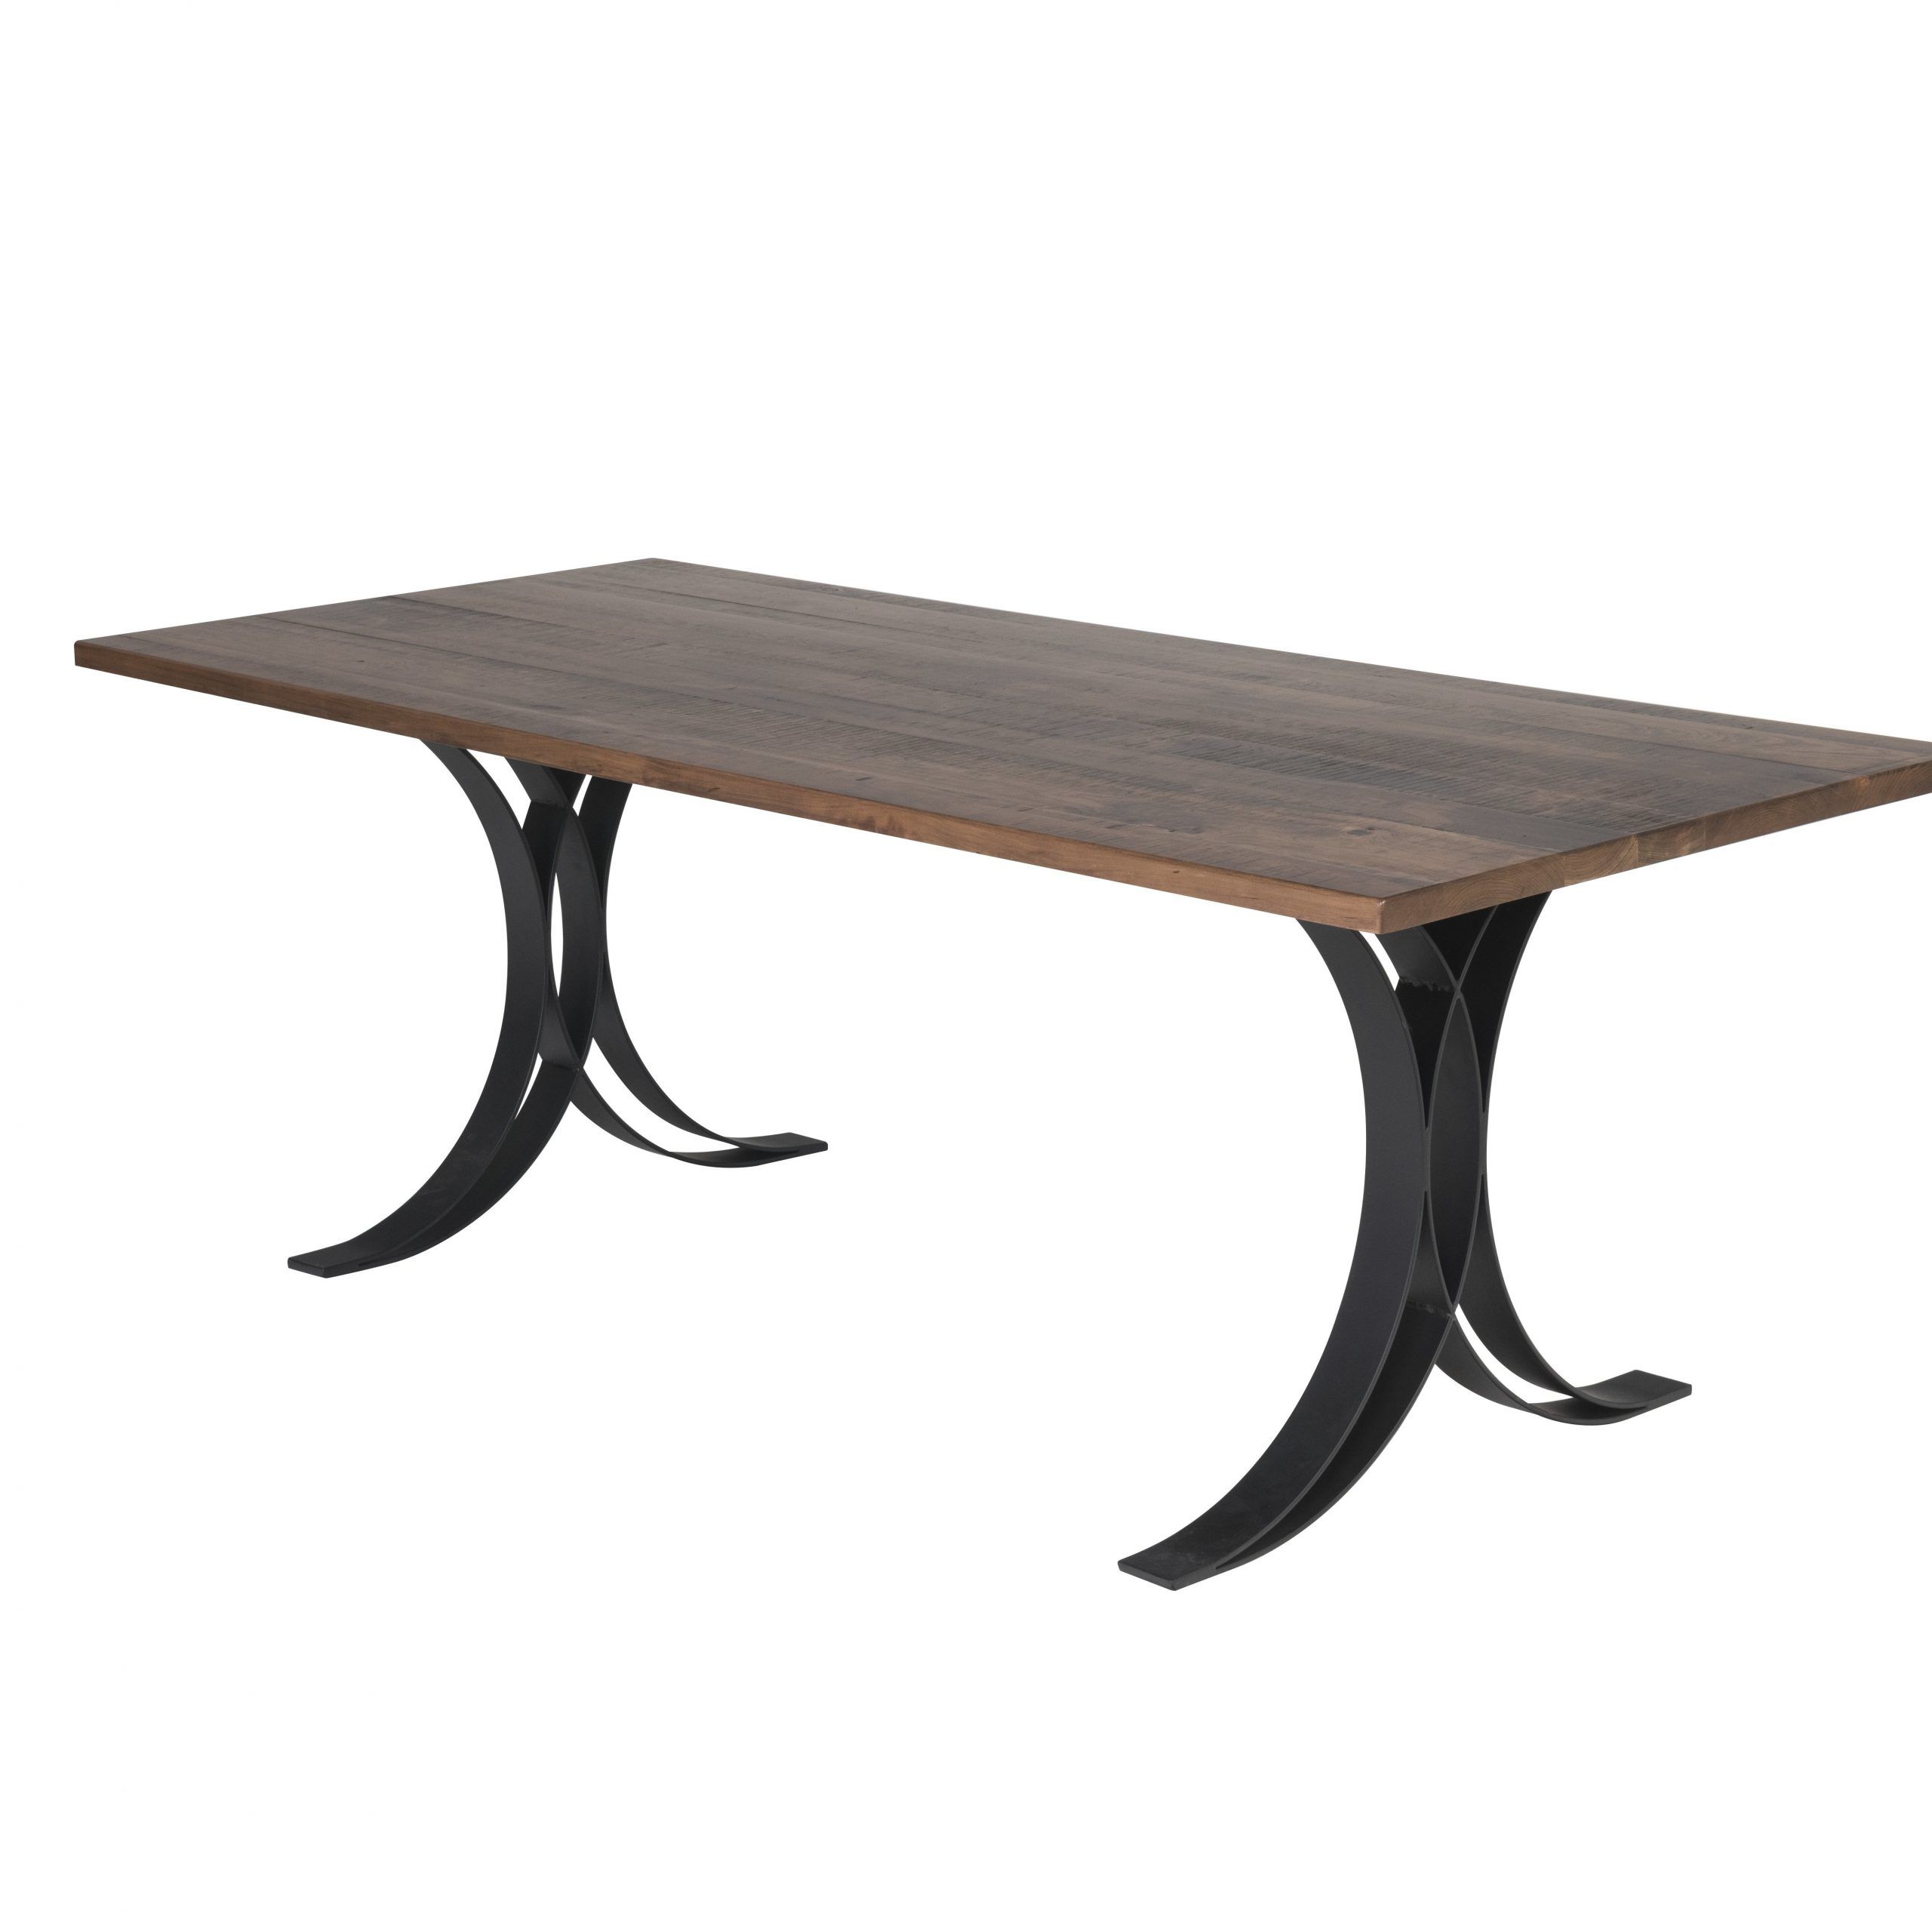 Most Recent Amish Dawson Dining Table With Regard To Dawson Pedestal Tables (View 17 of 25)